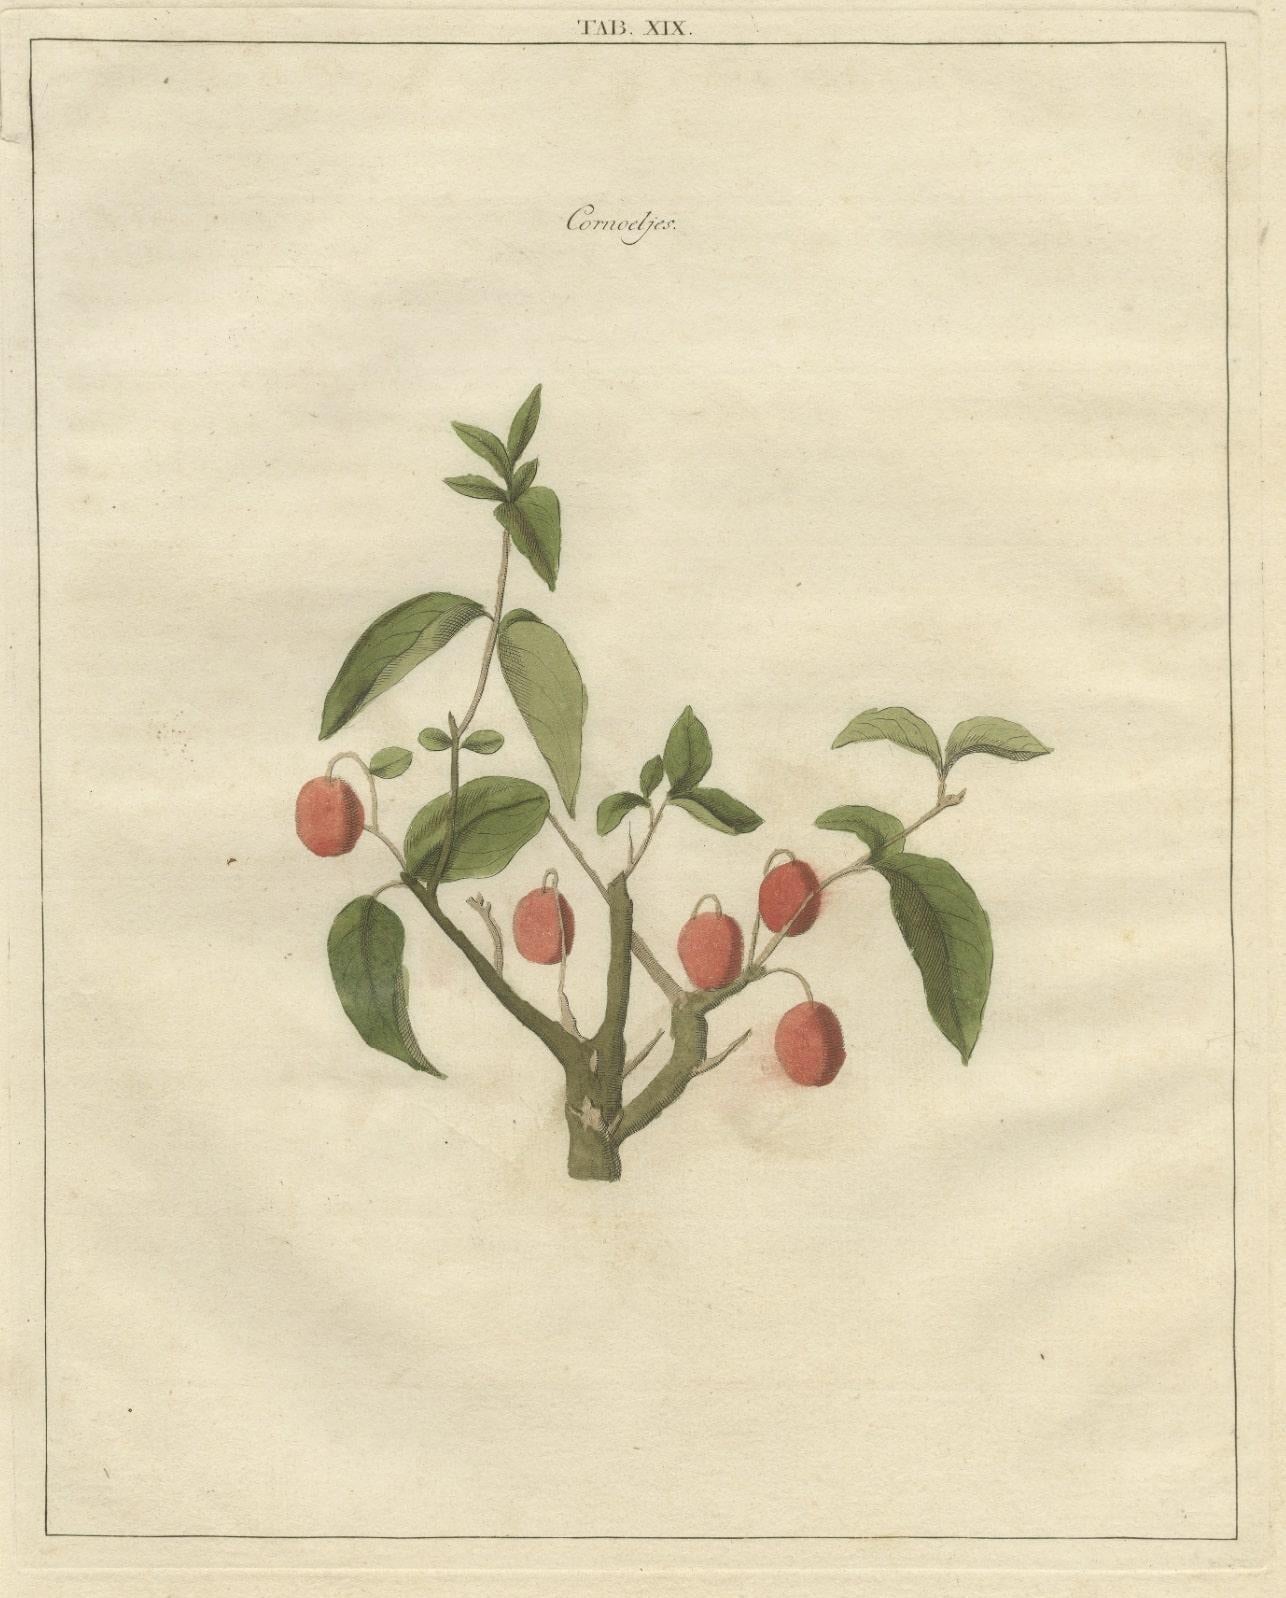 Paper Antique Print of Dogwood by Knoop, 1758